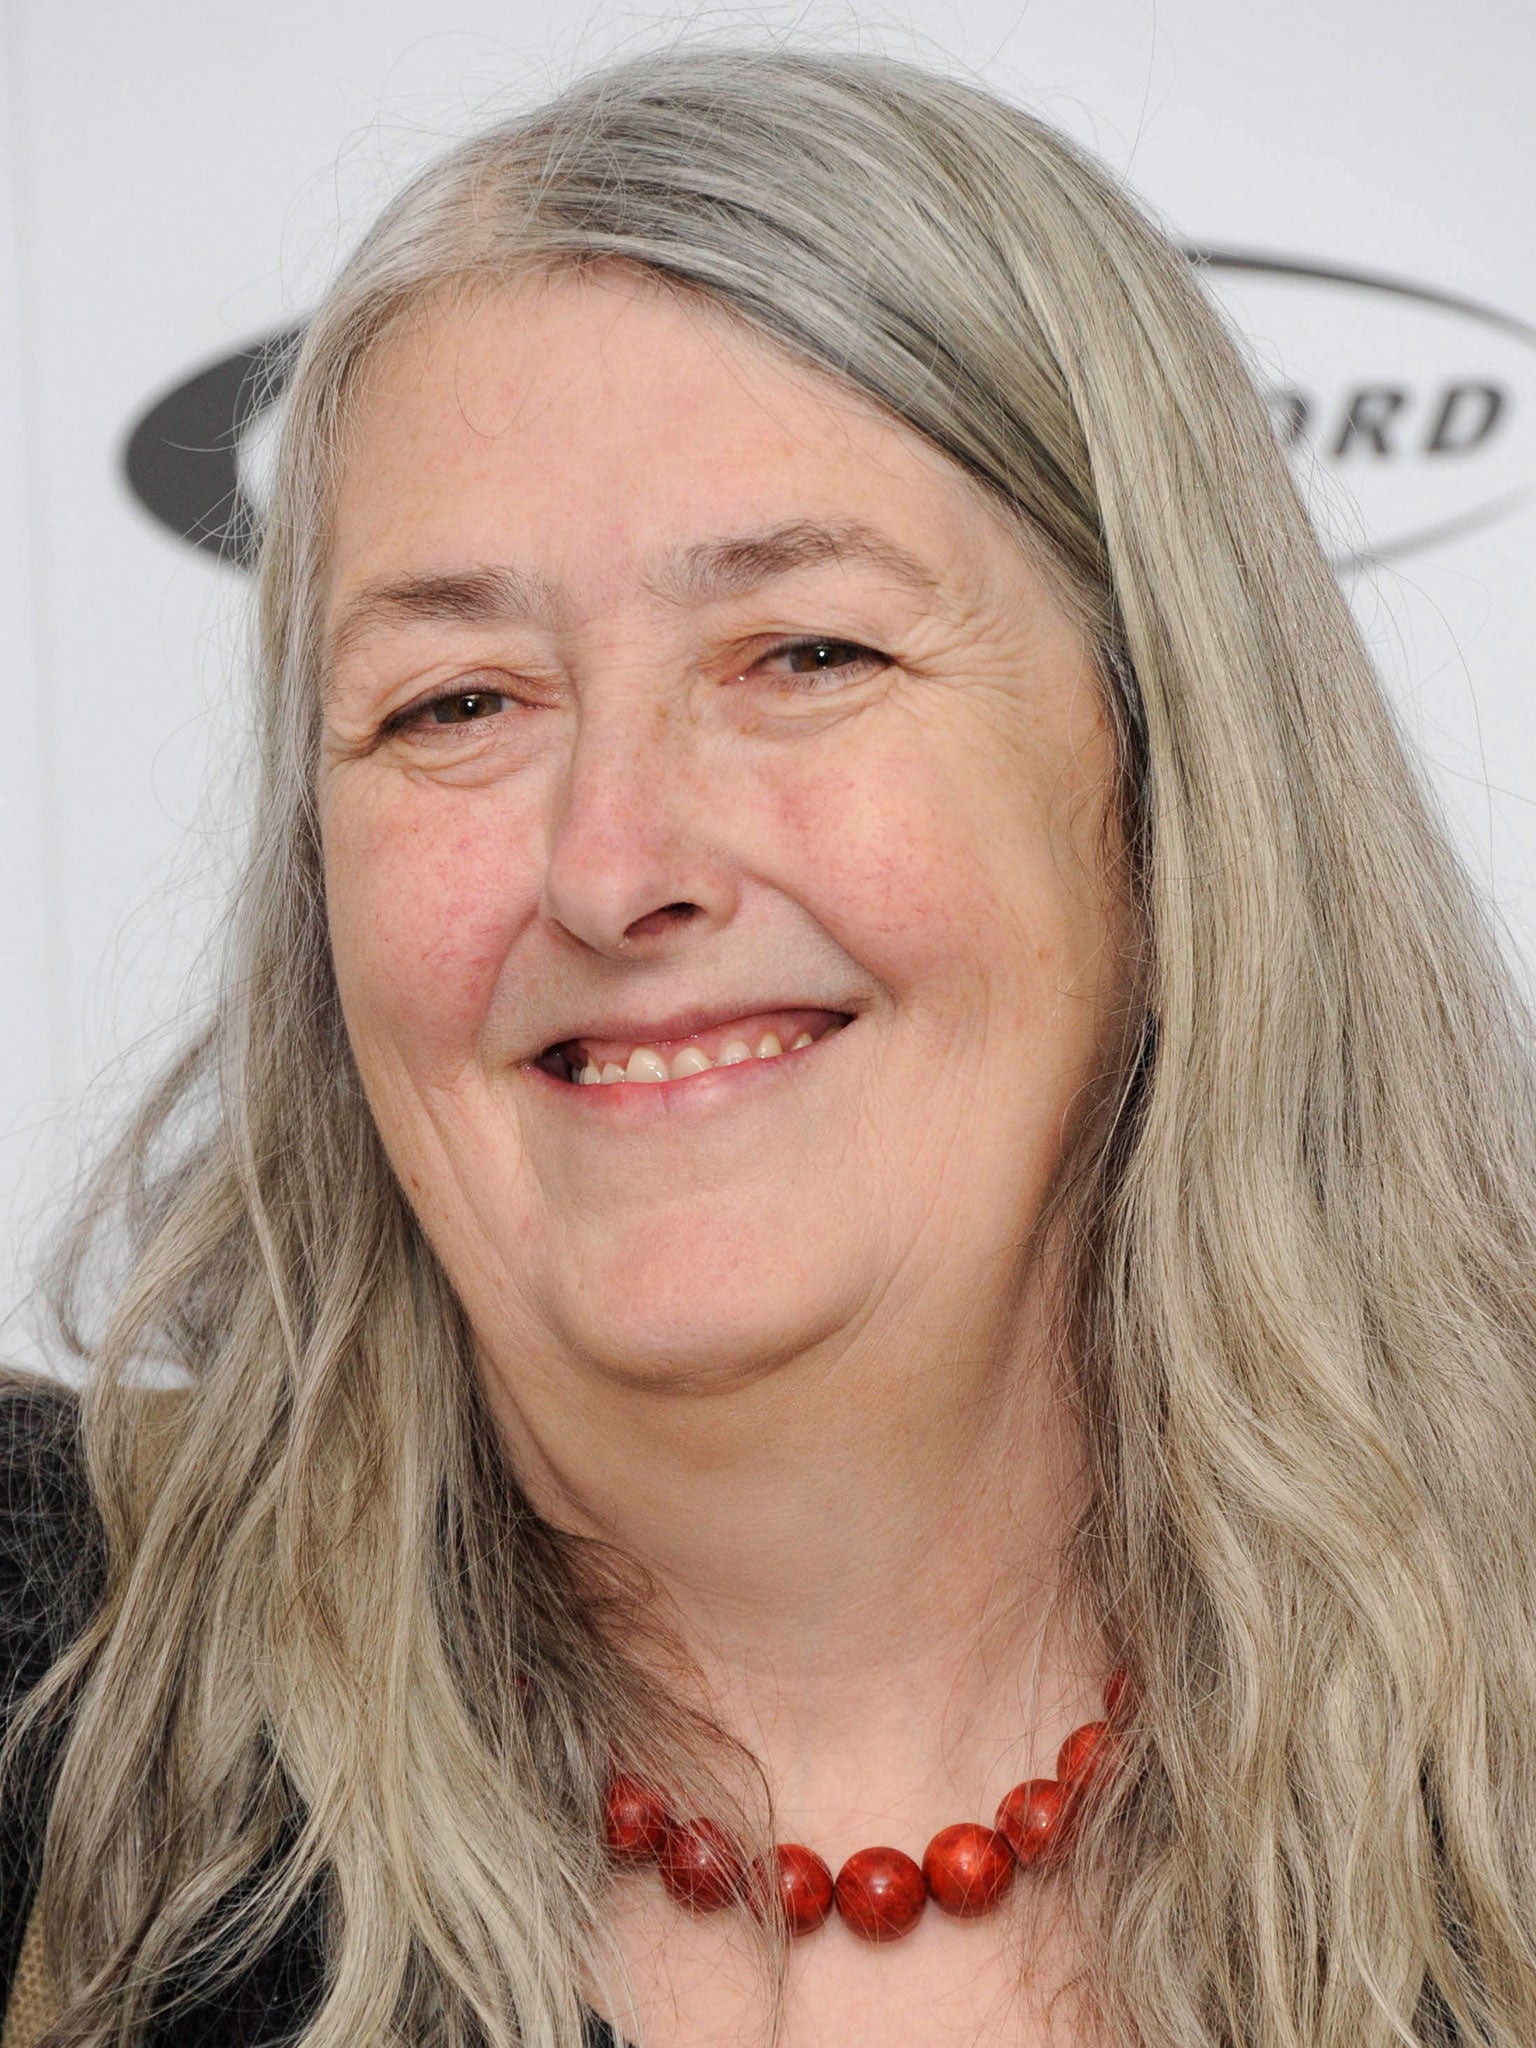 Charles Leadbeater has called for a prize to be awarded to those who stand up to the threats and abuse of misogynistic bullies on social media and for the award to be named after Mary Beard, pictured, who suffered abuse through social media channels